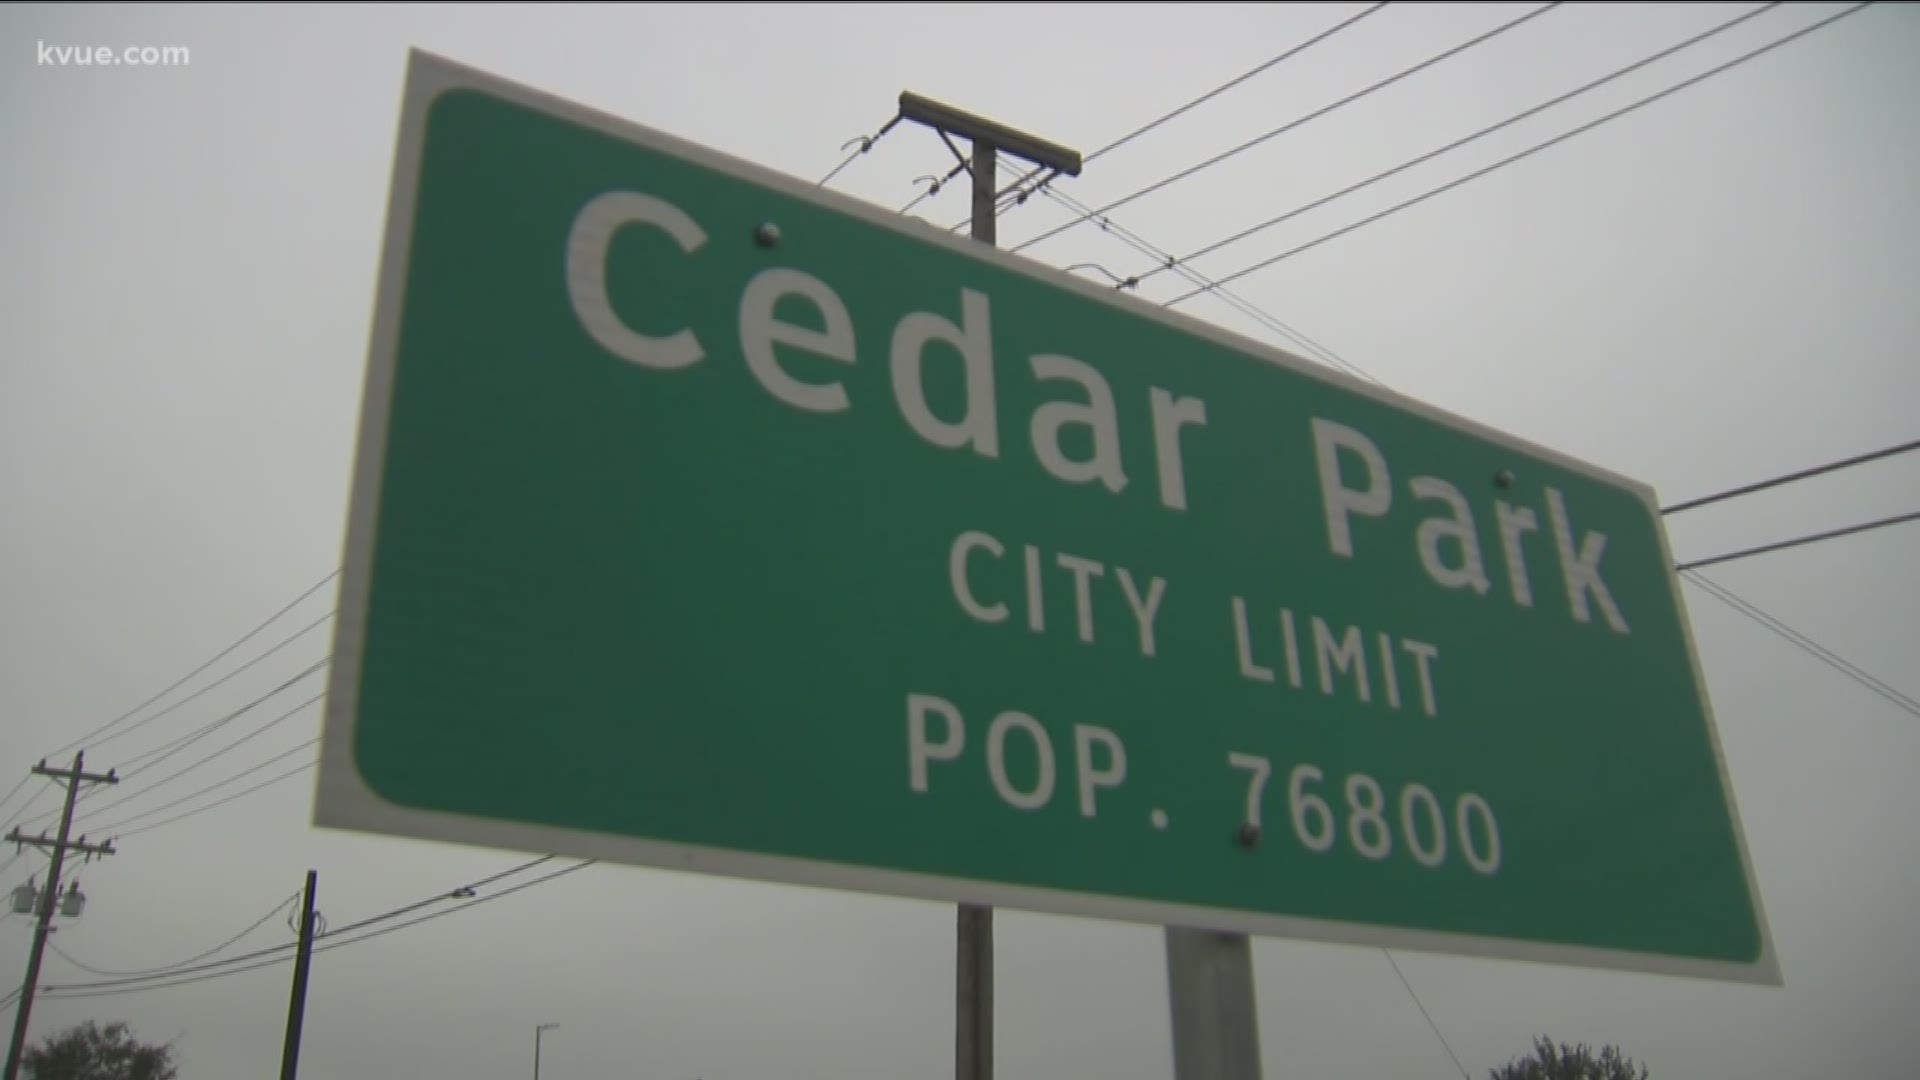 In 15 years, Cedar Park's population has doubled to about 80 thousand people. 
In the next 10 years, CITY LEADERS predict they'll grow by another 10 thousand. 
But as KVUE's Christy Millweard shows us --- Cedar Park is on the horizon of a different kind o